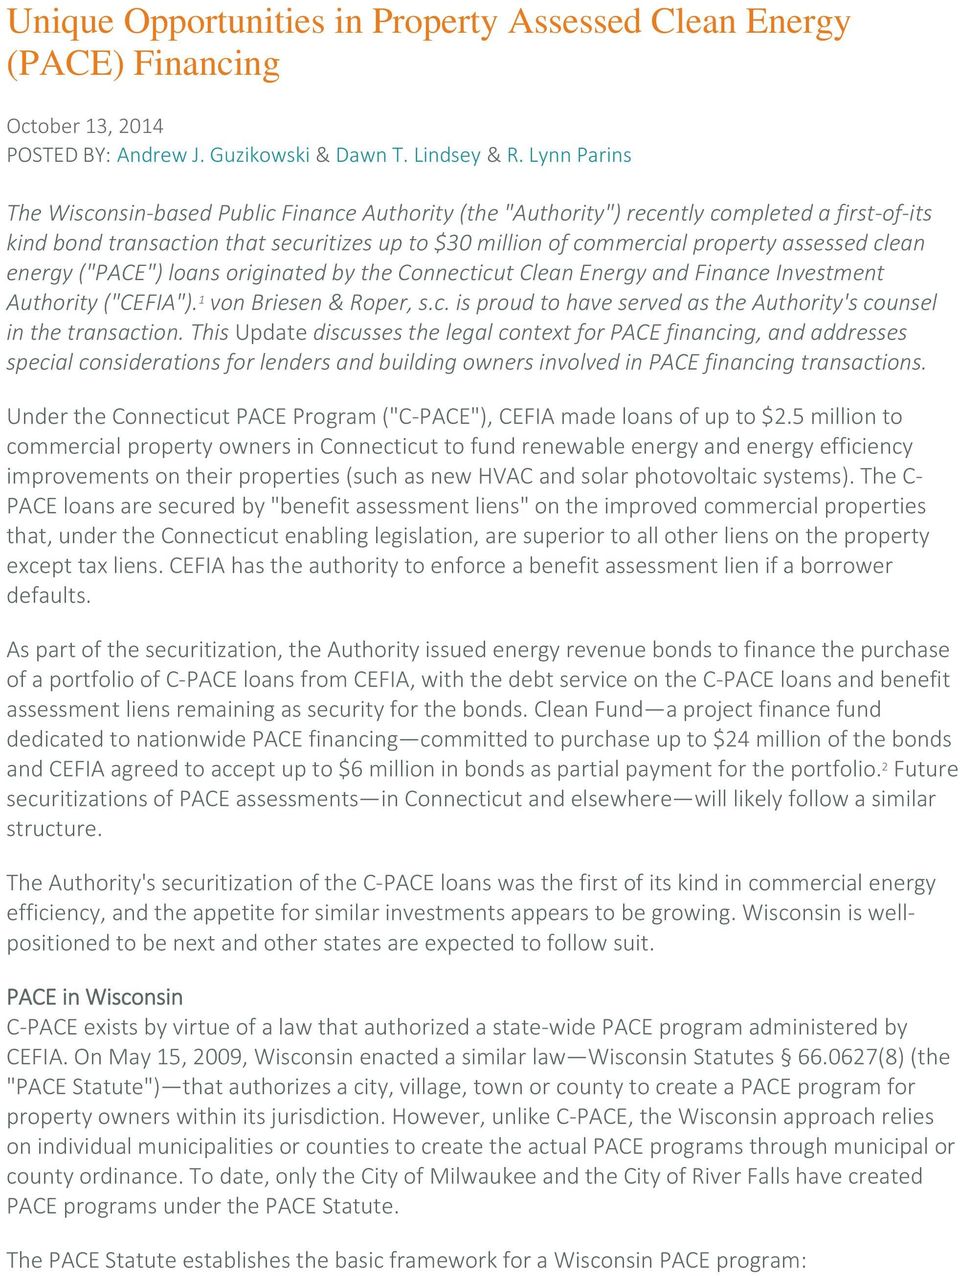 clean energy ("PACE") loans originated by the Connecticut Clean Energy and Finance Investment Authority ("CEFIA"). 1 von Briesen & Roper, s.c. is proud to have served as the Authority's counsel in the transaction.